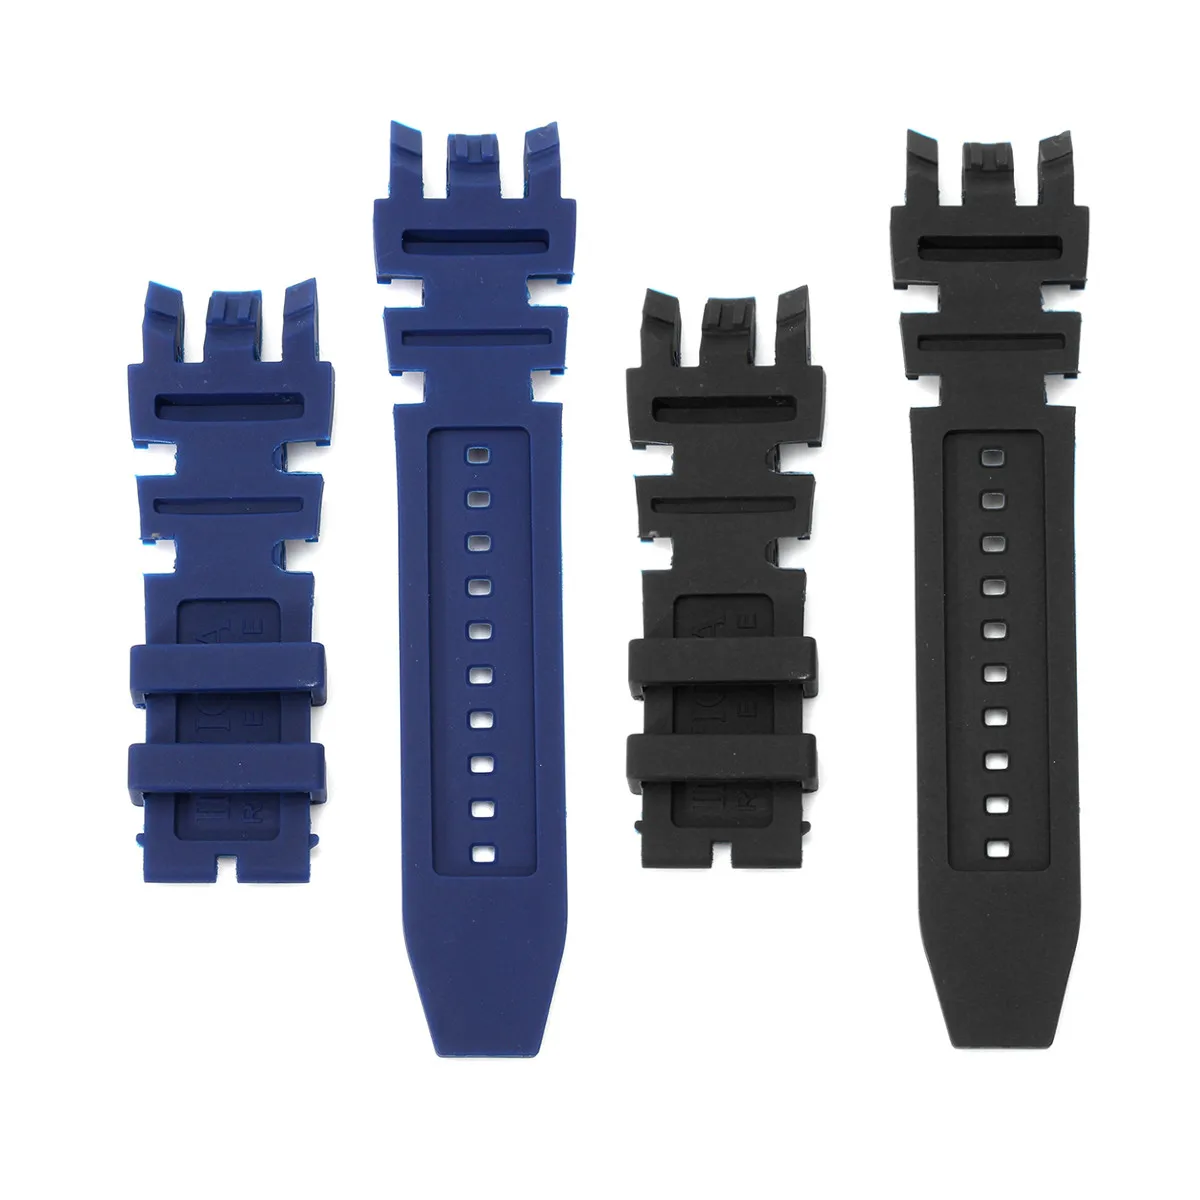 New Black Blue Silicone Rubber WatchBand Set Kit For Invicta Subaqua